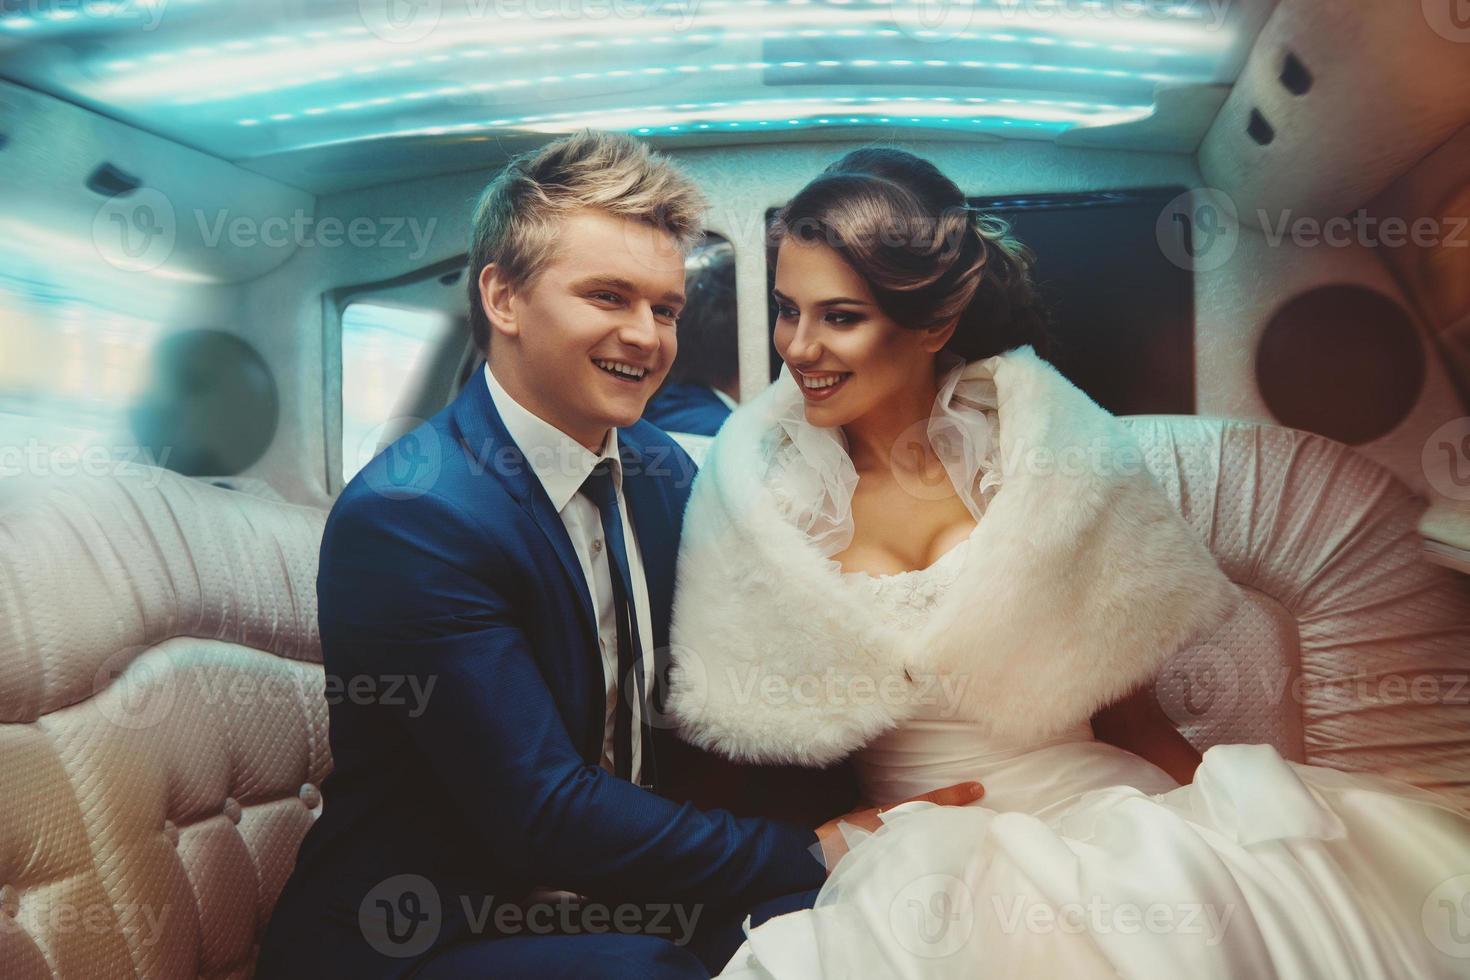 Lovely just merried couple driving in limousine photo